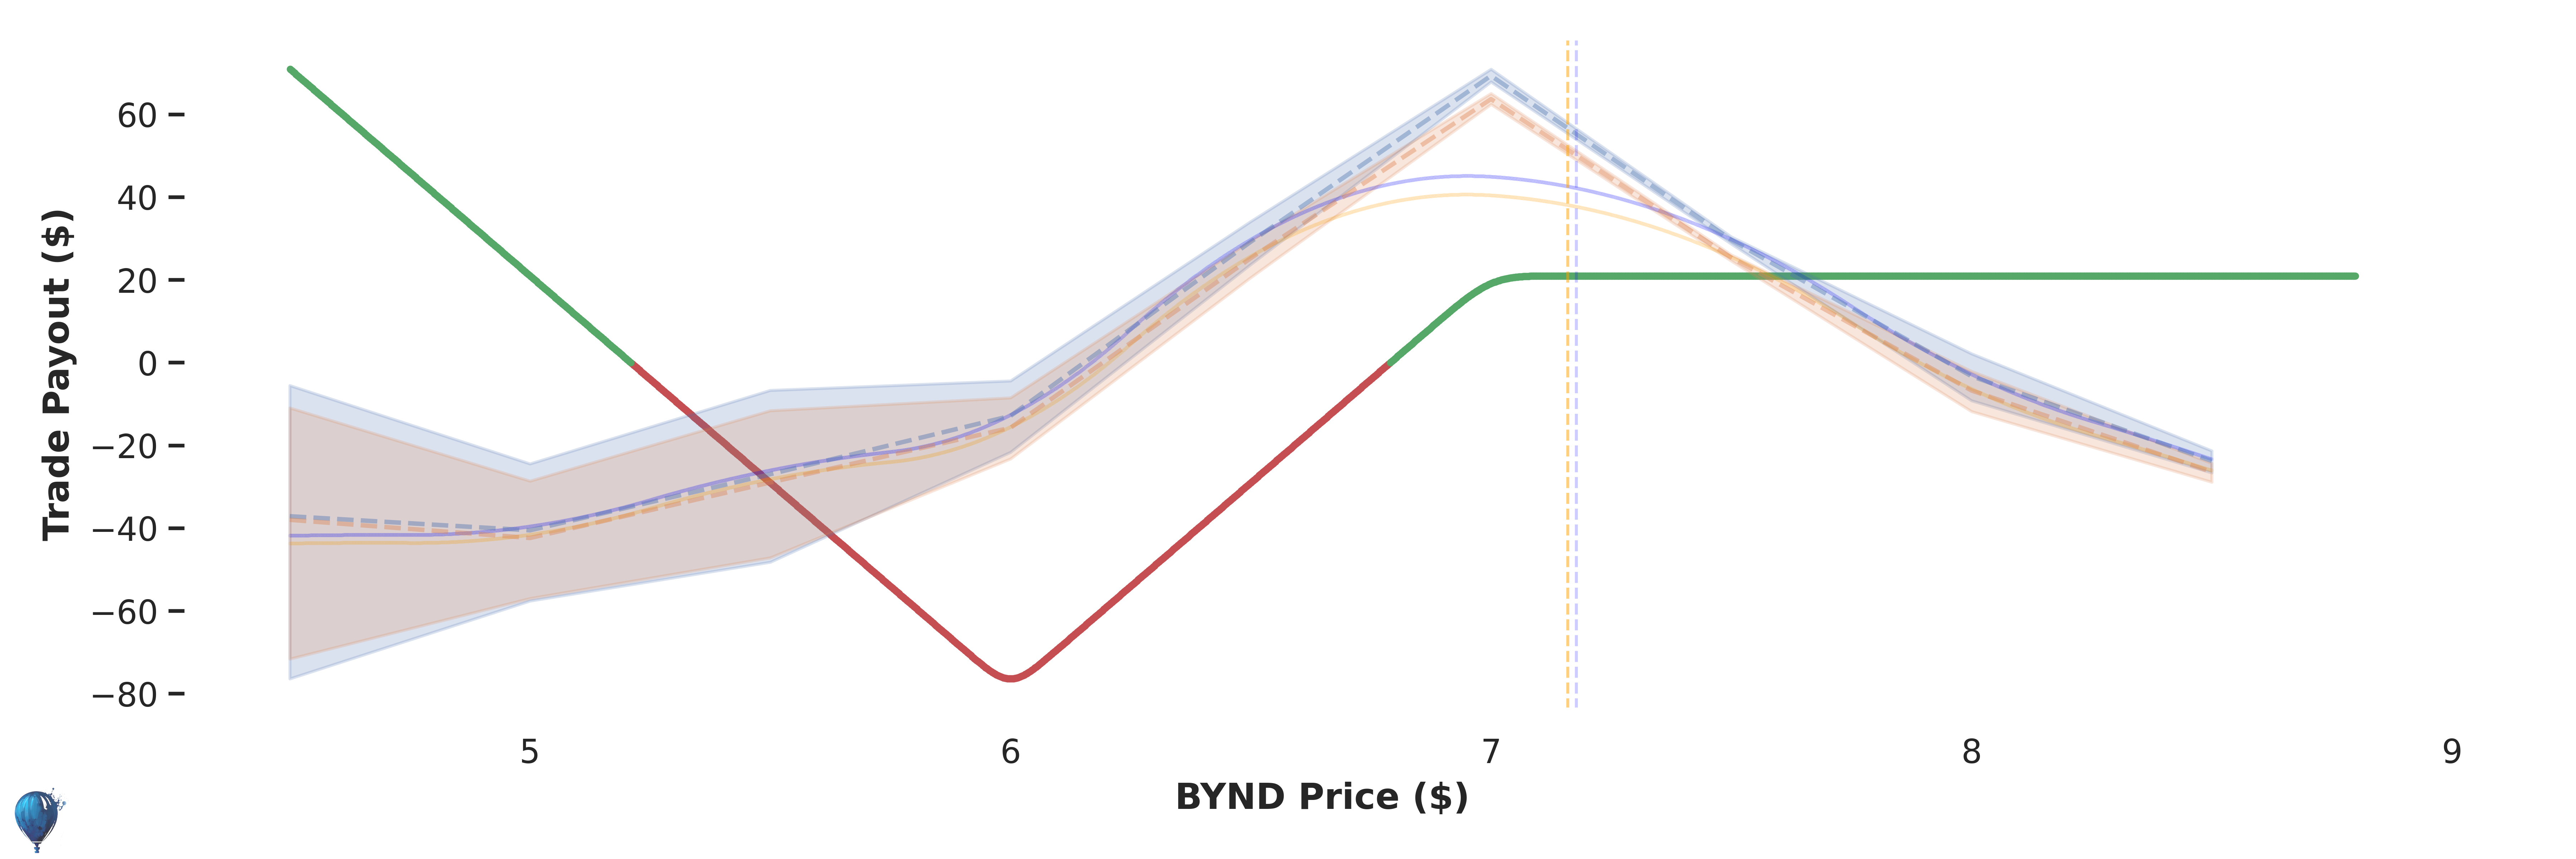 BYND trade payout at expiration